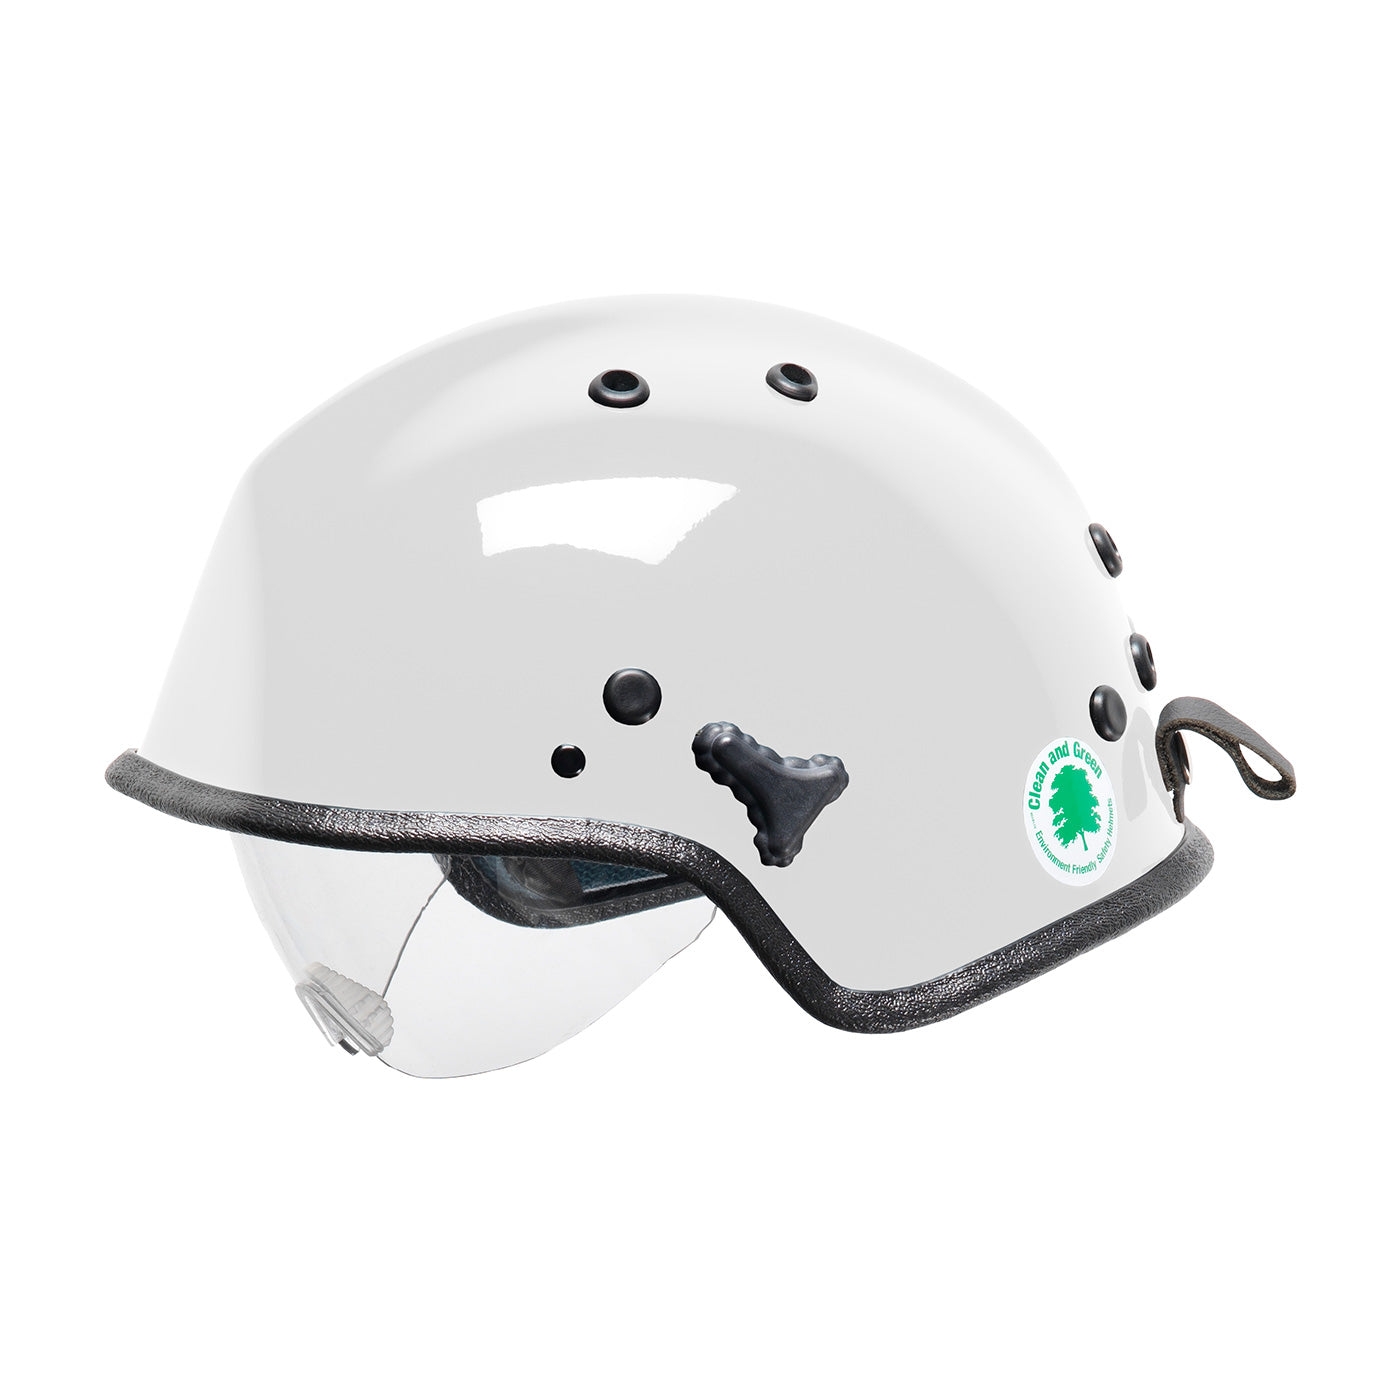 WR7H Water Rescue Helmet with Retractable Eye Protector